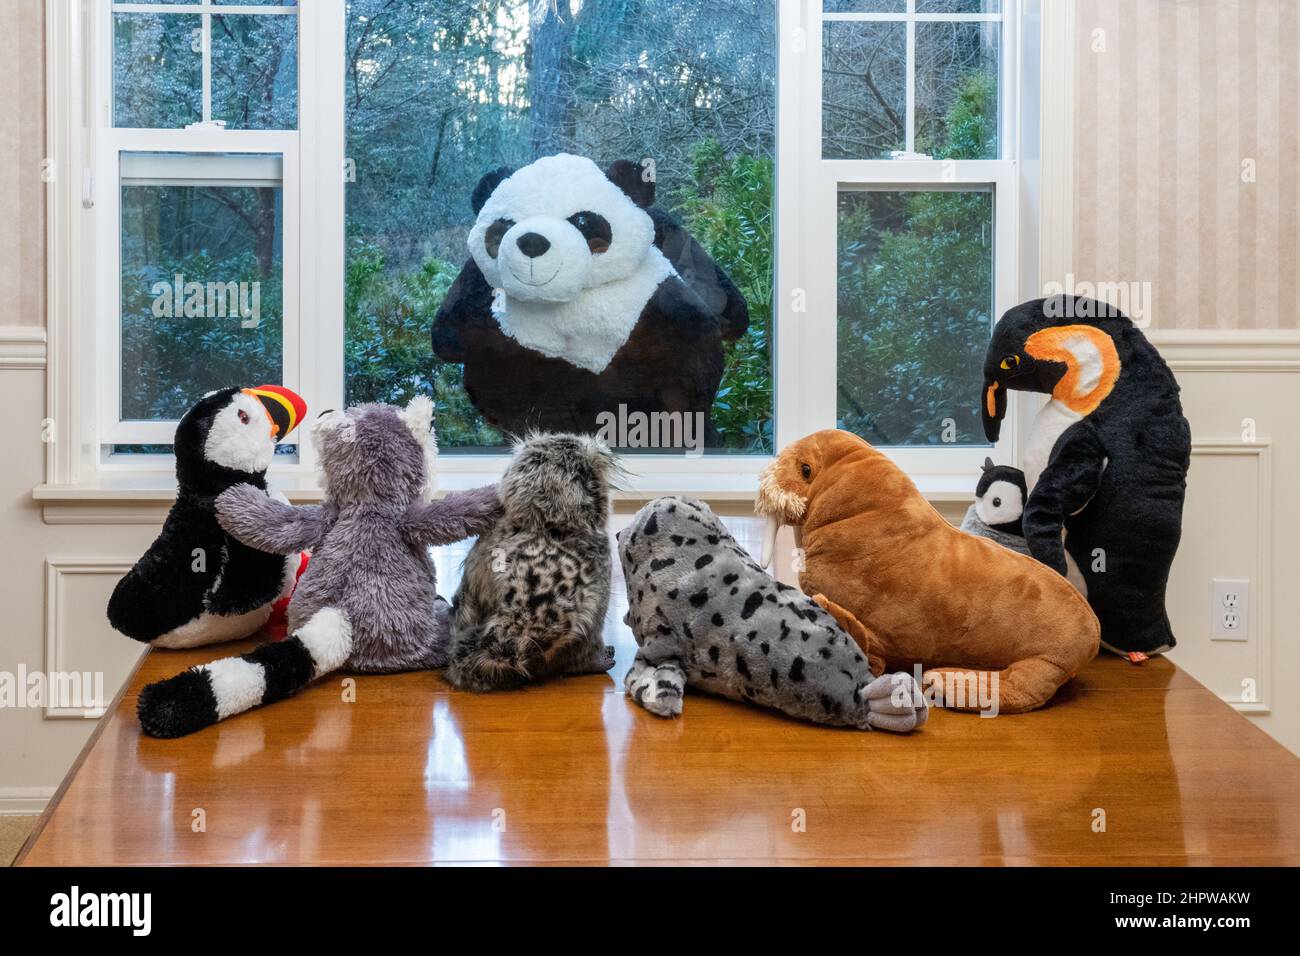 Stuffed animals staring out of a window at a giant panda bear looking in at them! Stock Photo